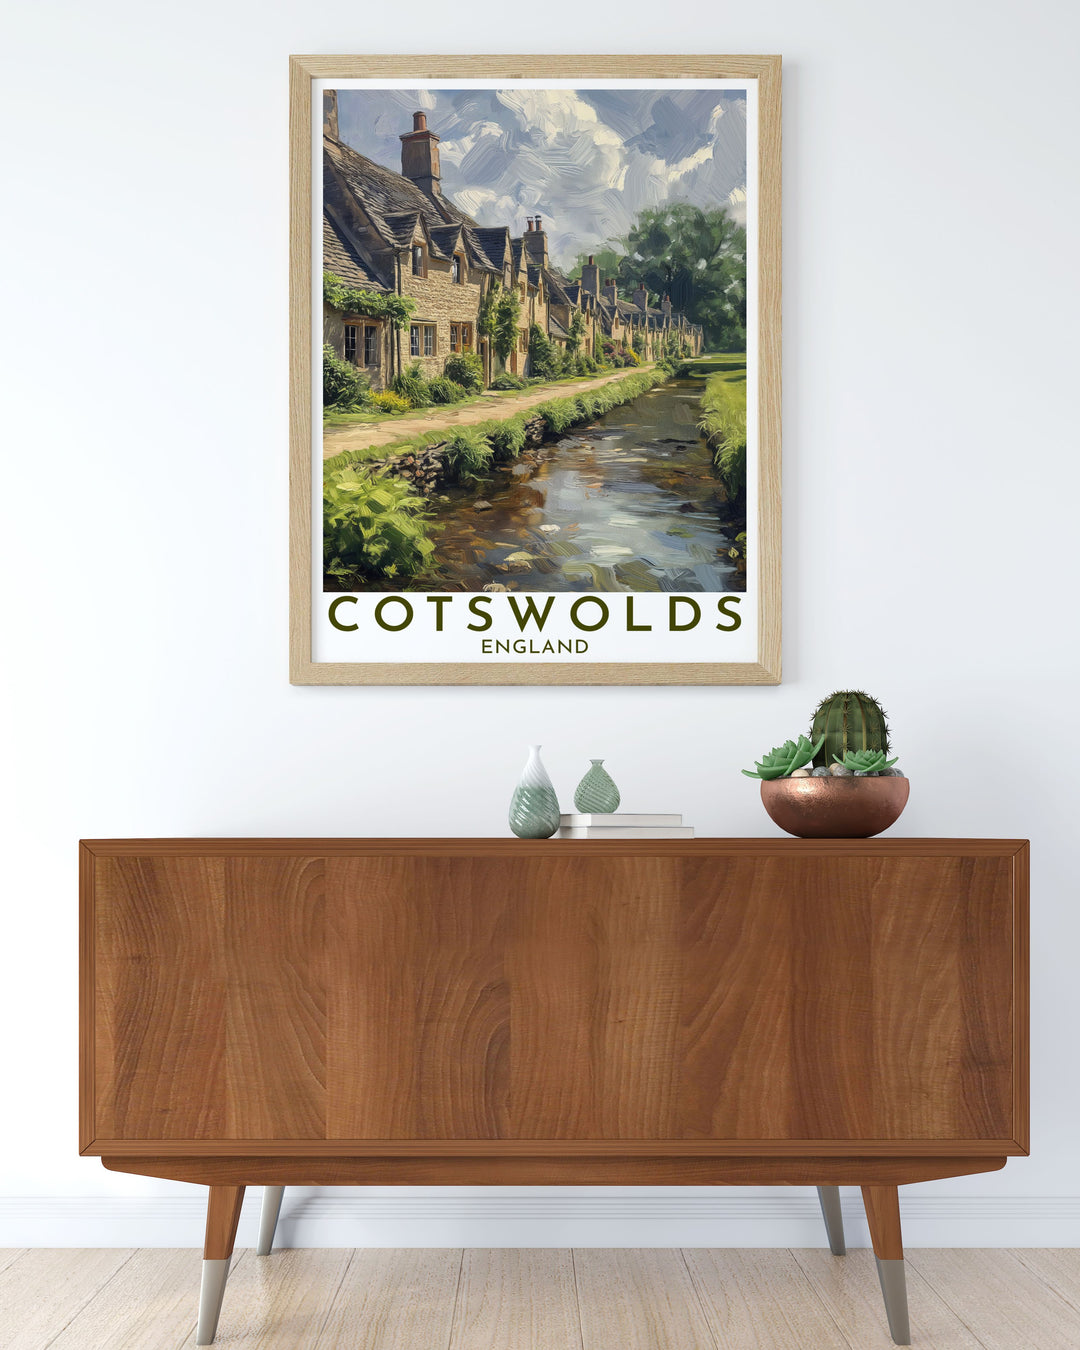 Featuring lush vistas of the Cotswolds and the iconic Arlington Row, this poster is perfect for those who wish to bring a piece of Englands natural beauty and architectural grandeur into their home.